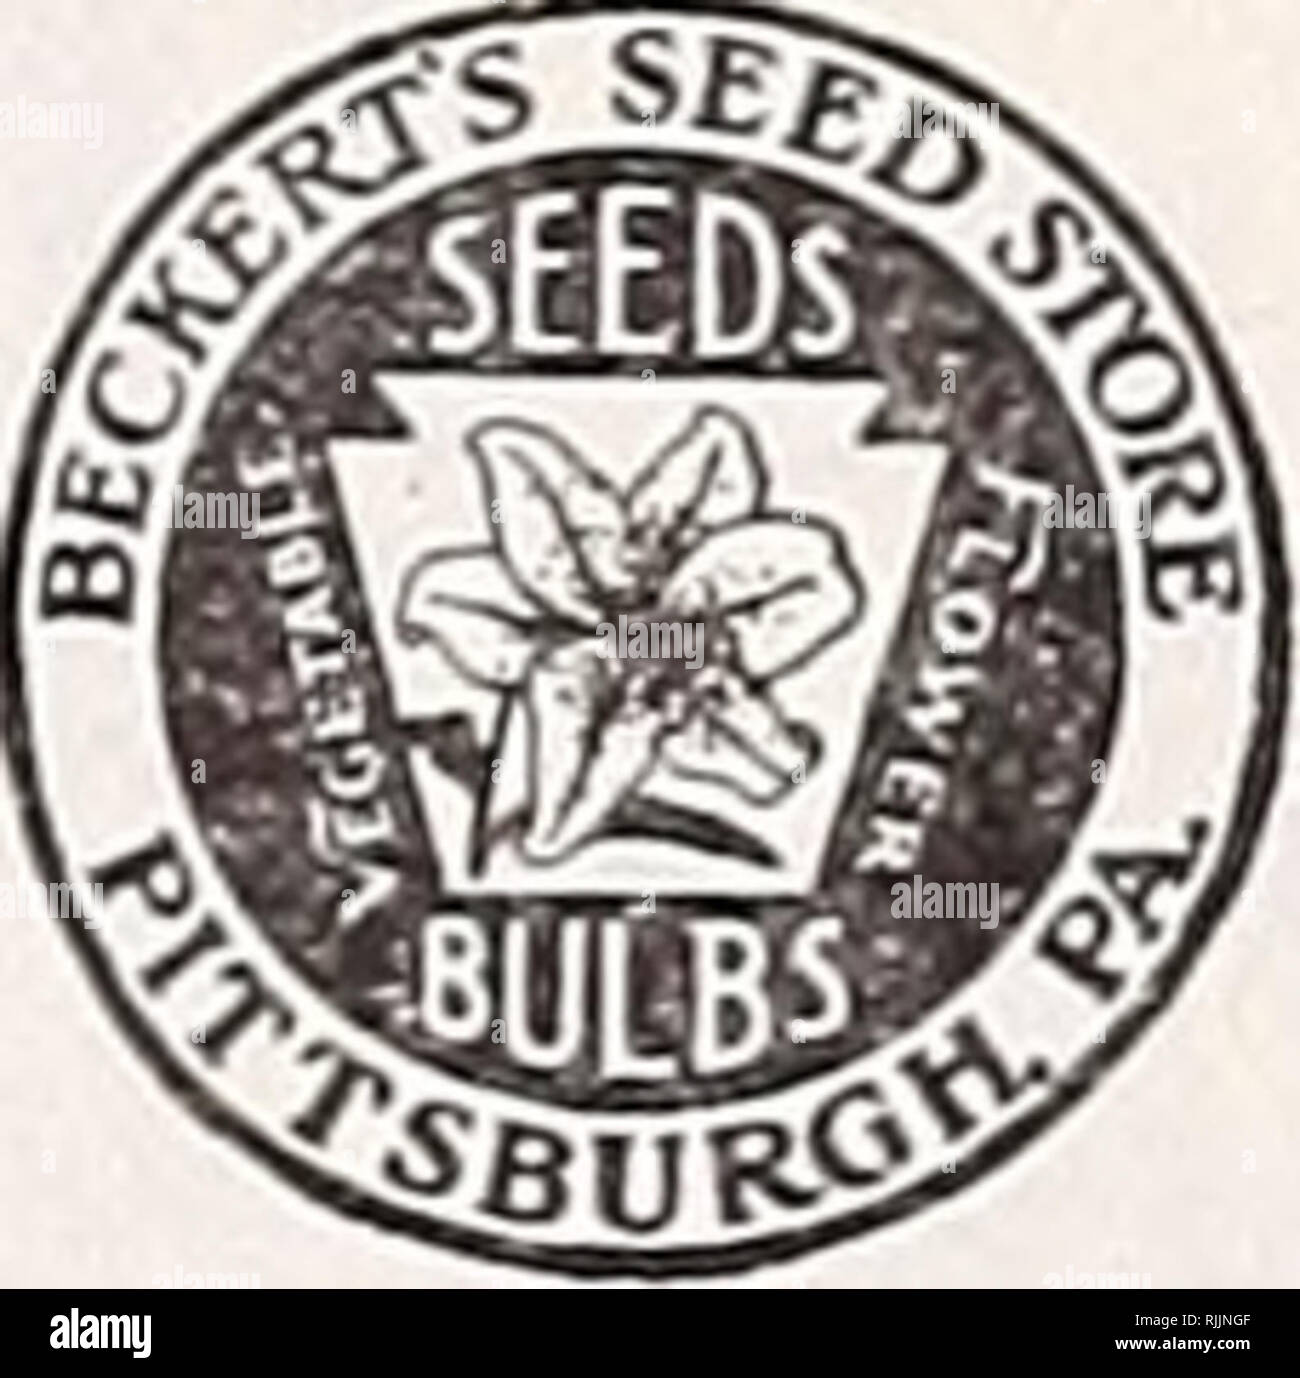 . Beckert's bulbs. Nurseries (Horticulture) Pennsylvania Pittsburgh Catalogs; Nursery stock Pennsylvania Pittsburgh Catalogs; Flowers Seeds Pennsylvania Pittsburgh Catalogs; Bulbs (Plants) Pennsylvania Pittsburgh Catalogs; Grasses Seeds Pennsylvania Pittsburgh Catalogs. BECKERT'S SEED STORE 101-103 Federal St. (North Side), PITTSBURGH, PENNSYLVANIA Send by- .Date- (State if wanted by Parcel Post, Express. Freight or Steamer) To (Name). .19. (Mr., Mrs. or Miss: write very plainly: always write name the same way) P. O. Box, Street or Rural Delivery Post Office. County Sta te. Station or Exp. Off Stock Photo